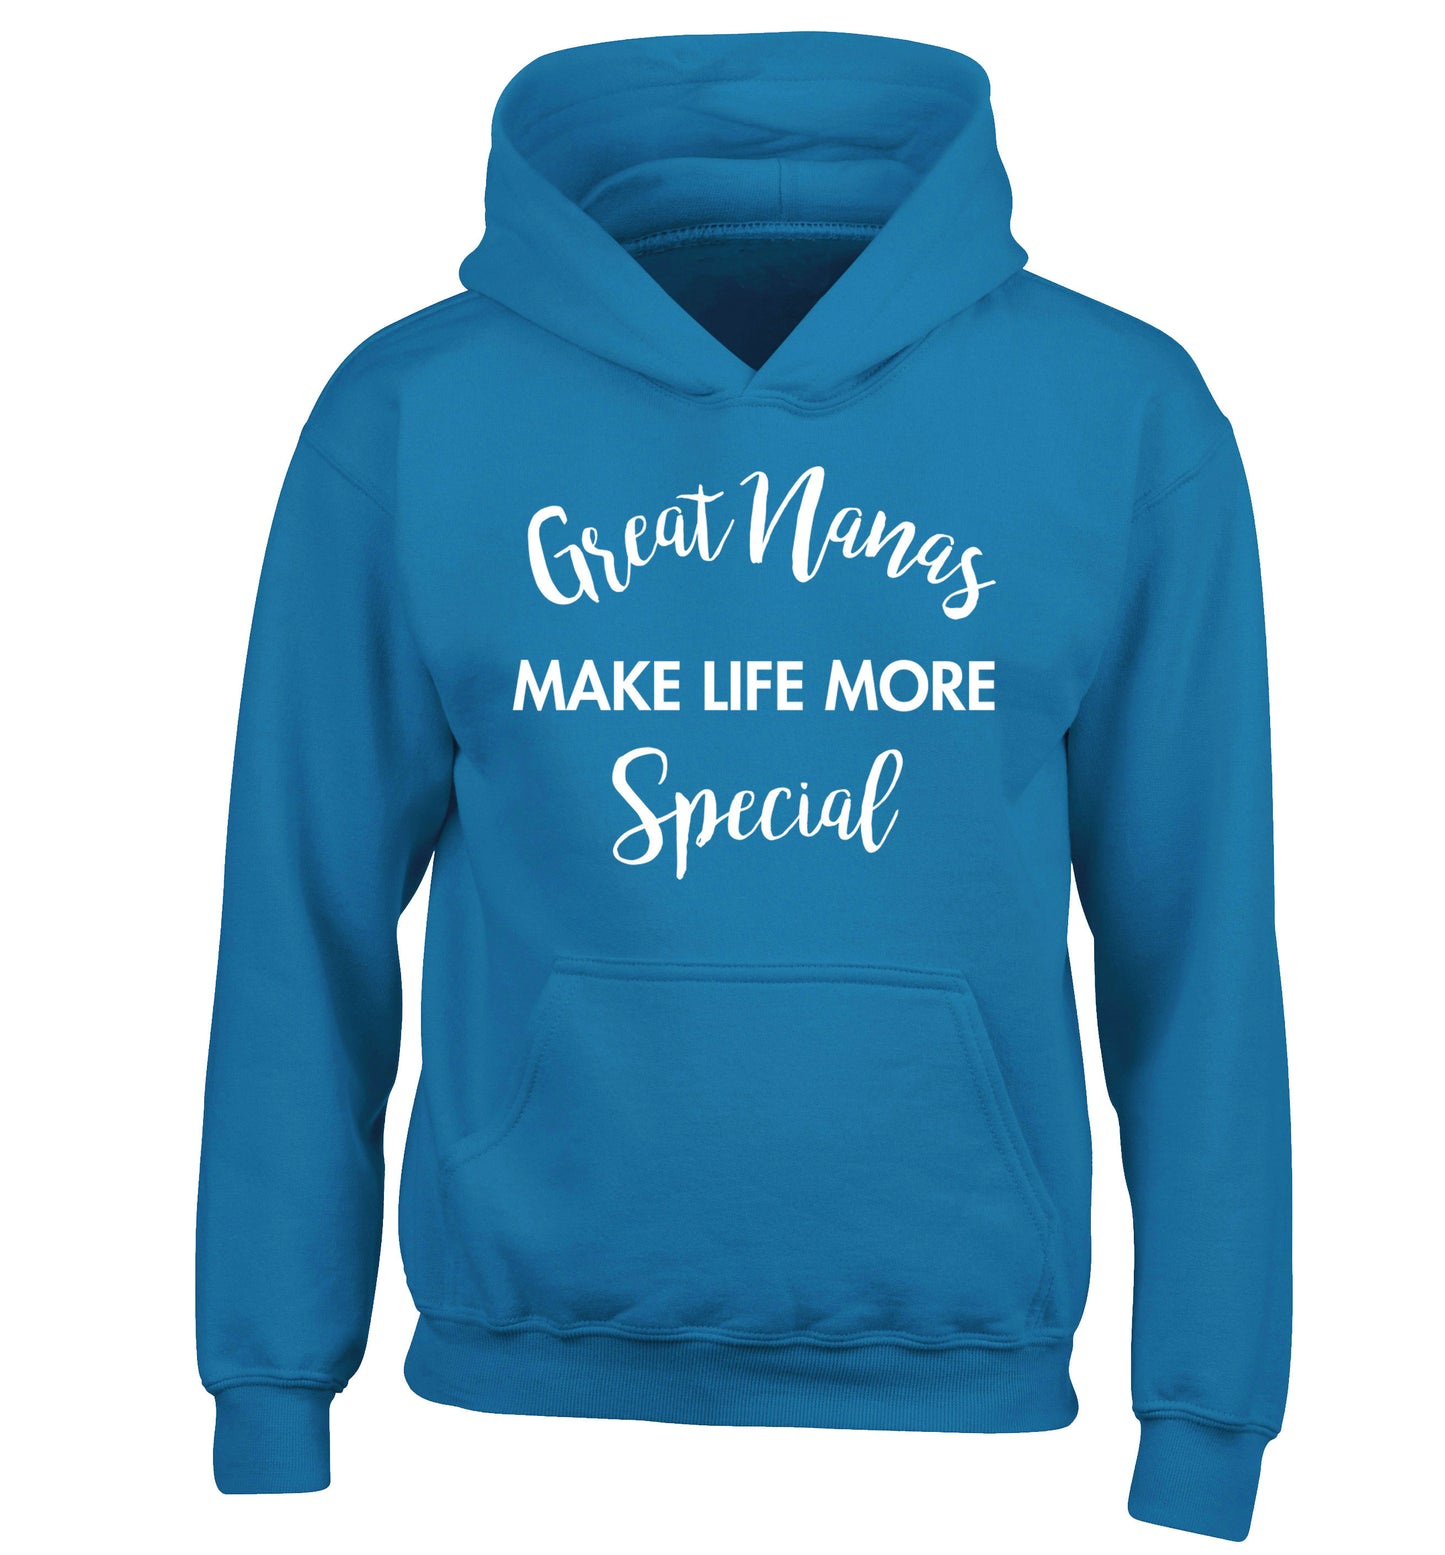 Great nanas make life more special children's blue hoodie 12-14 Years